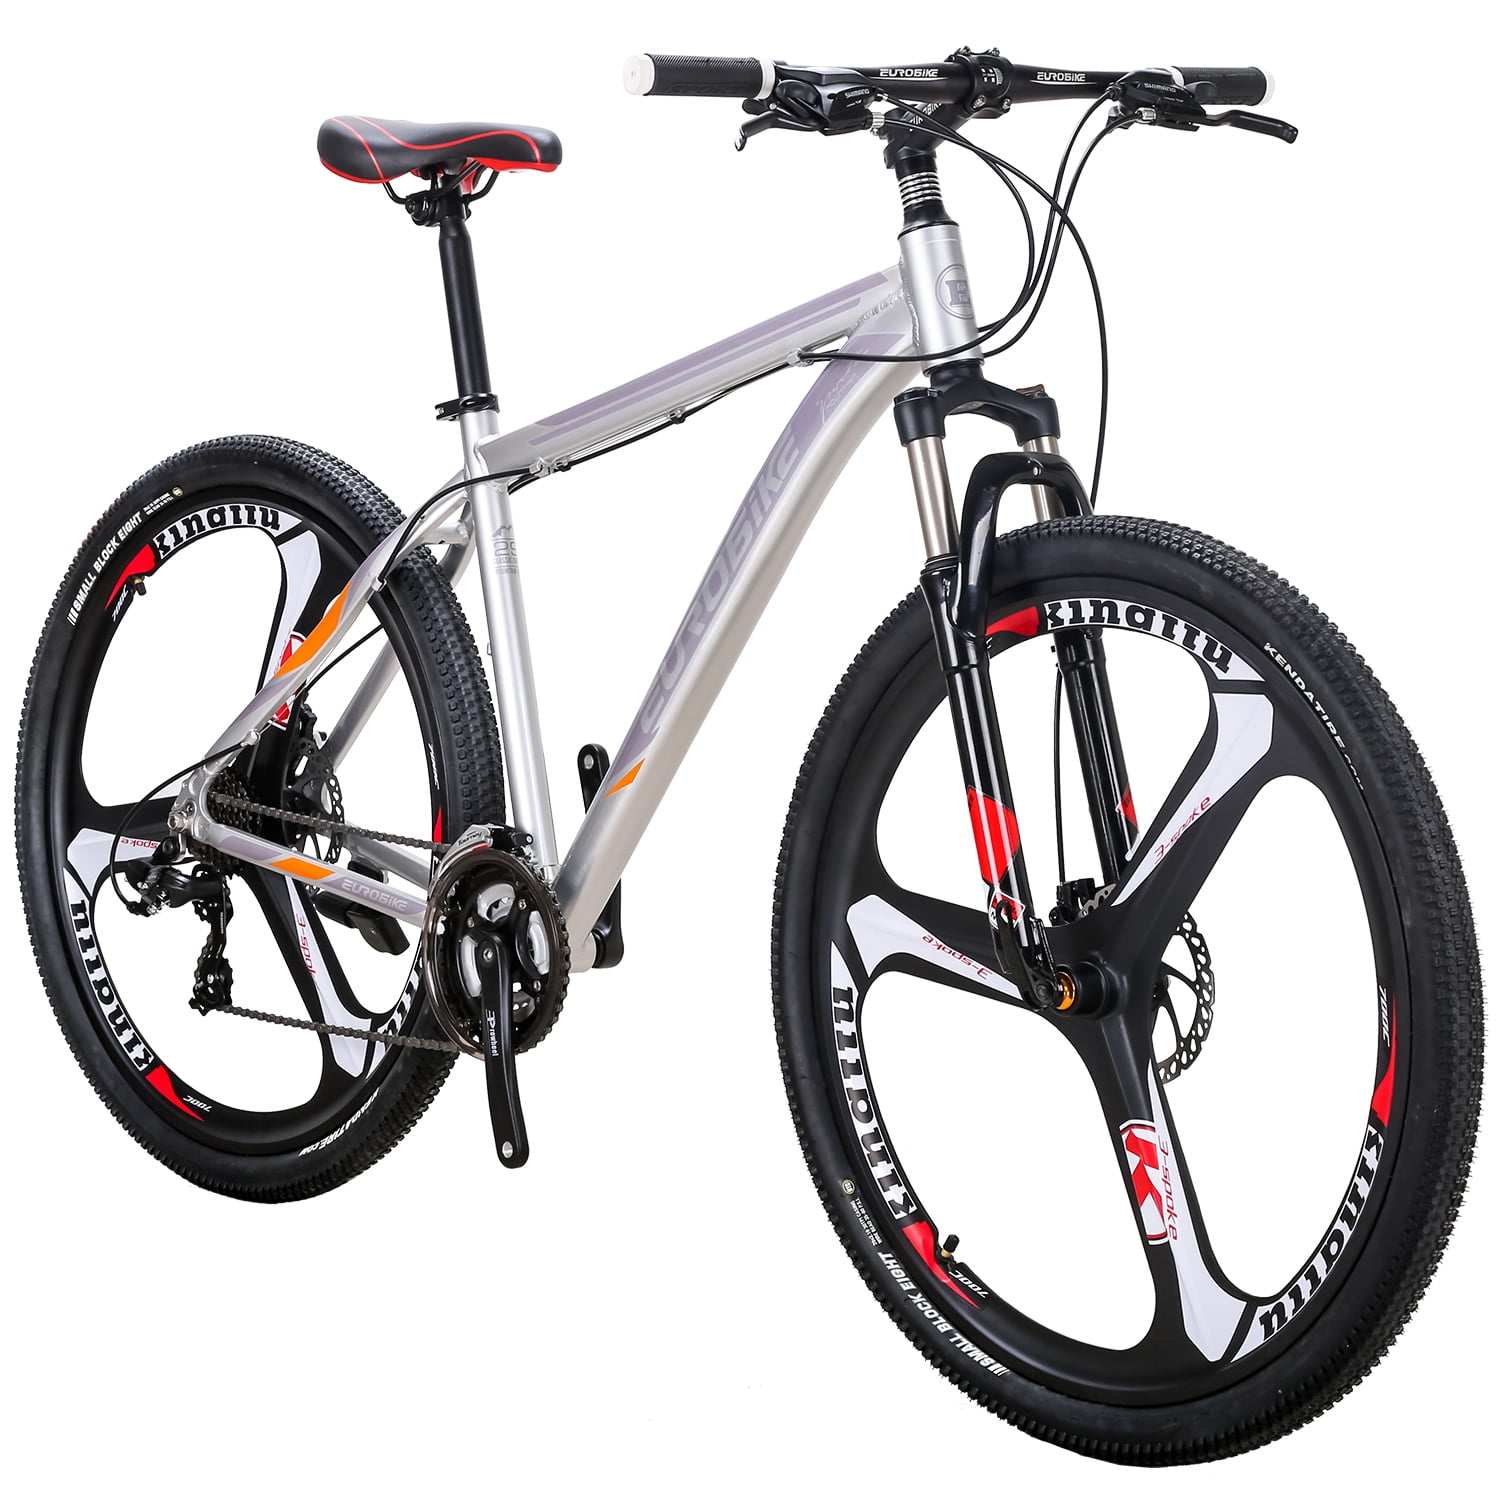 Eurobike X9 Mountain Bike Aluminum Frame 29 Inch Wheels 21 Speed Shifter Dual Disc Brakes Front Suspension 29er Mens Bicycle